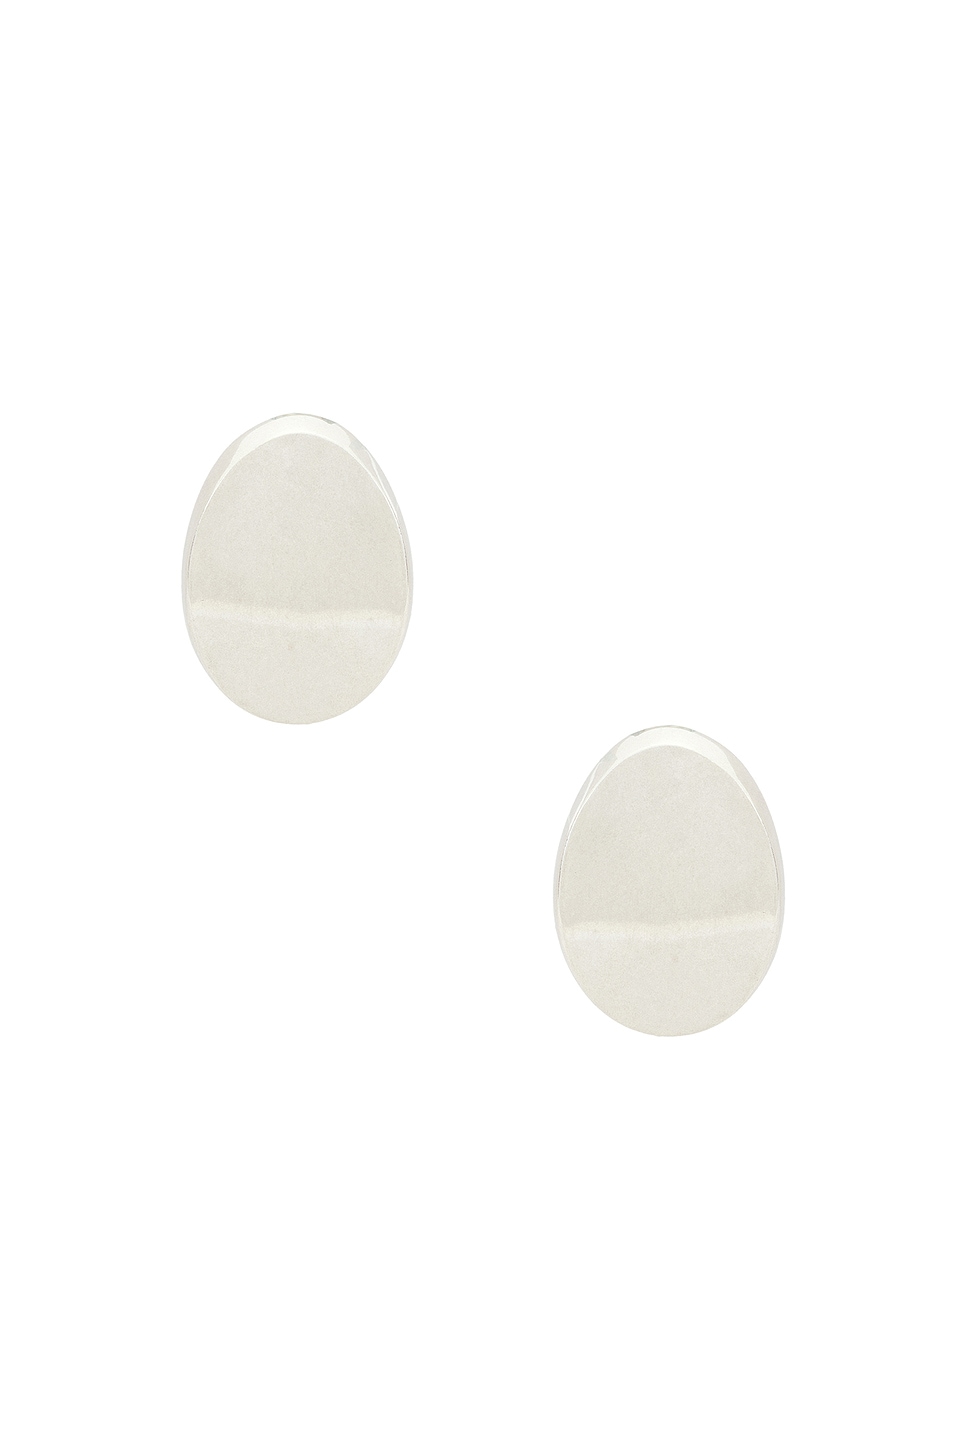 Image 1 of Isabel Marant Boucle D'oreill Drop Earrings in Silver